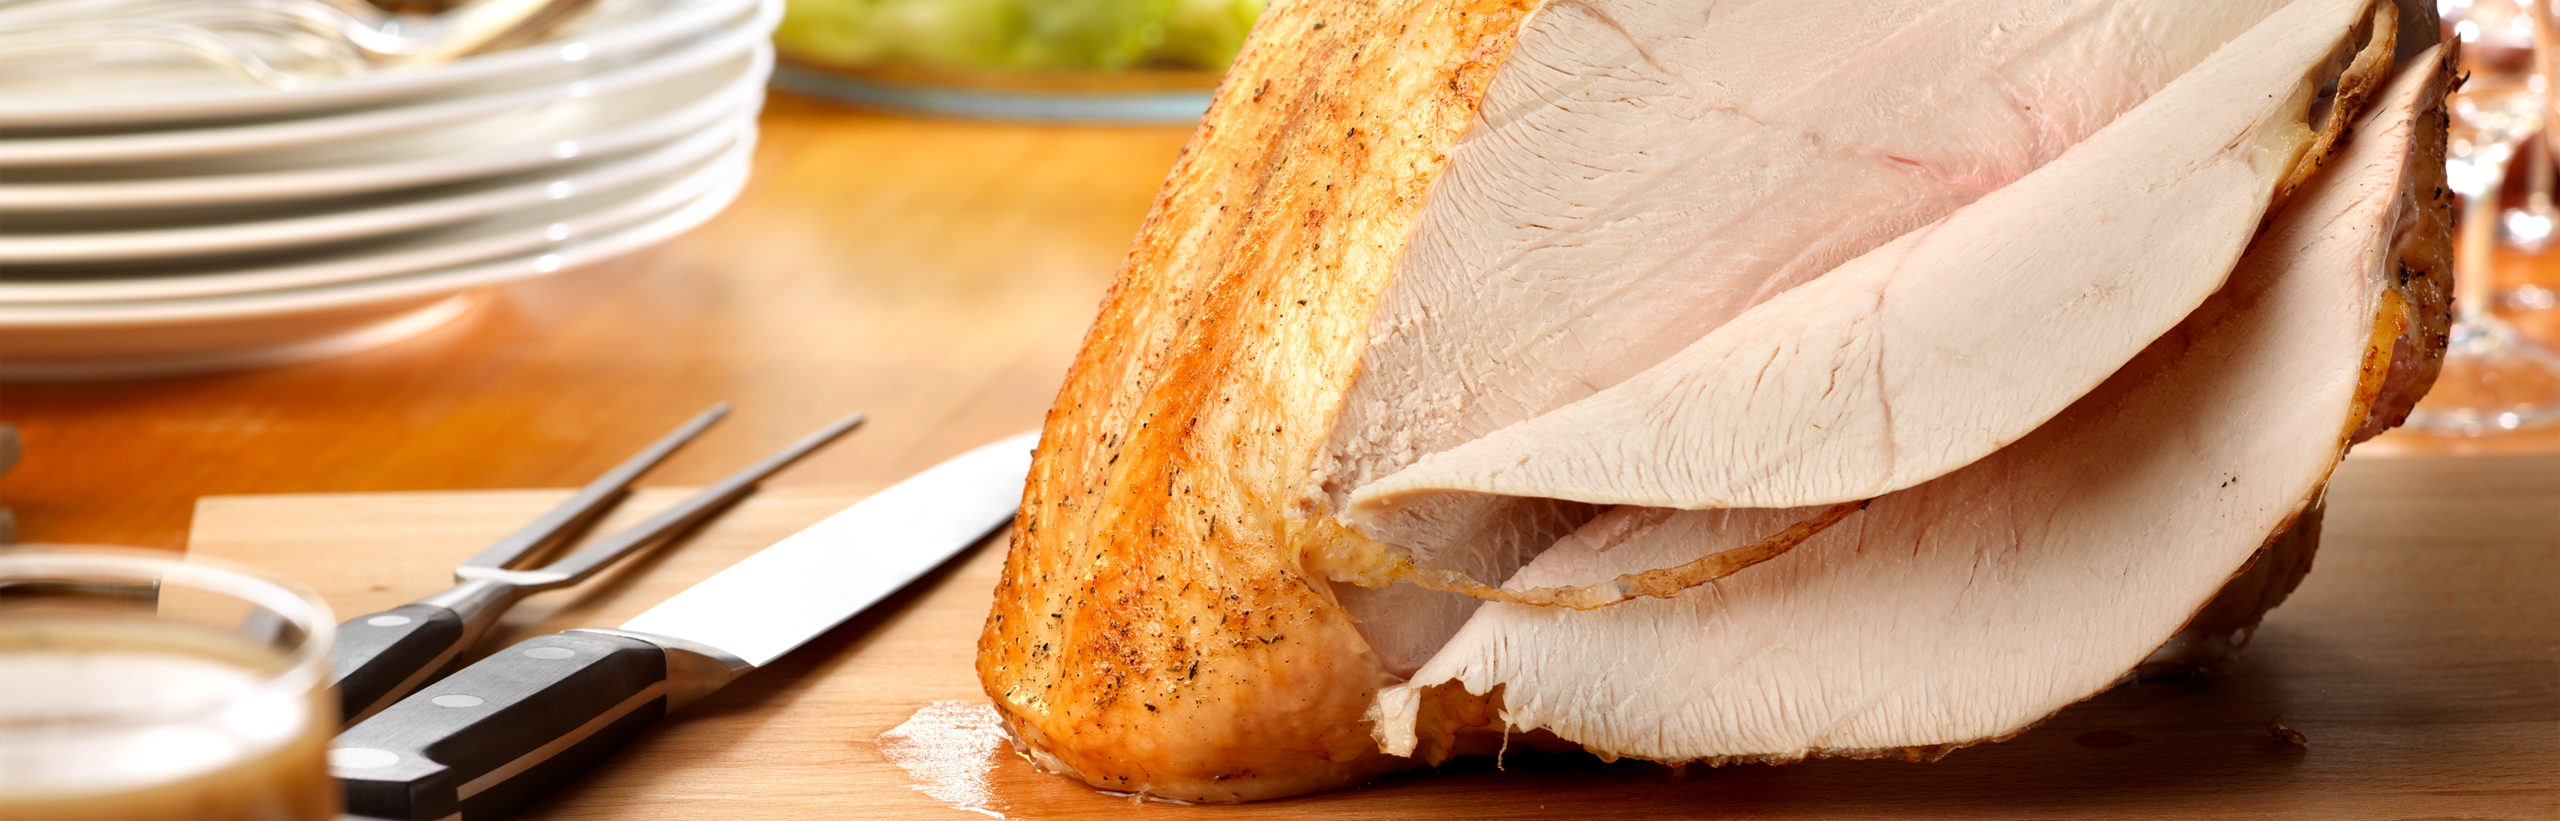 https://www.campbells.com/swanson/wp-content/uploads/2020/10/Roasted-Turkey-Breast-With-Herbed-Au-Jus.jpg